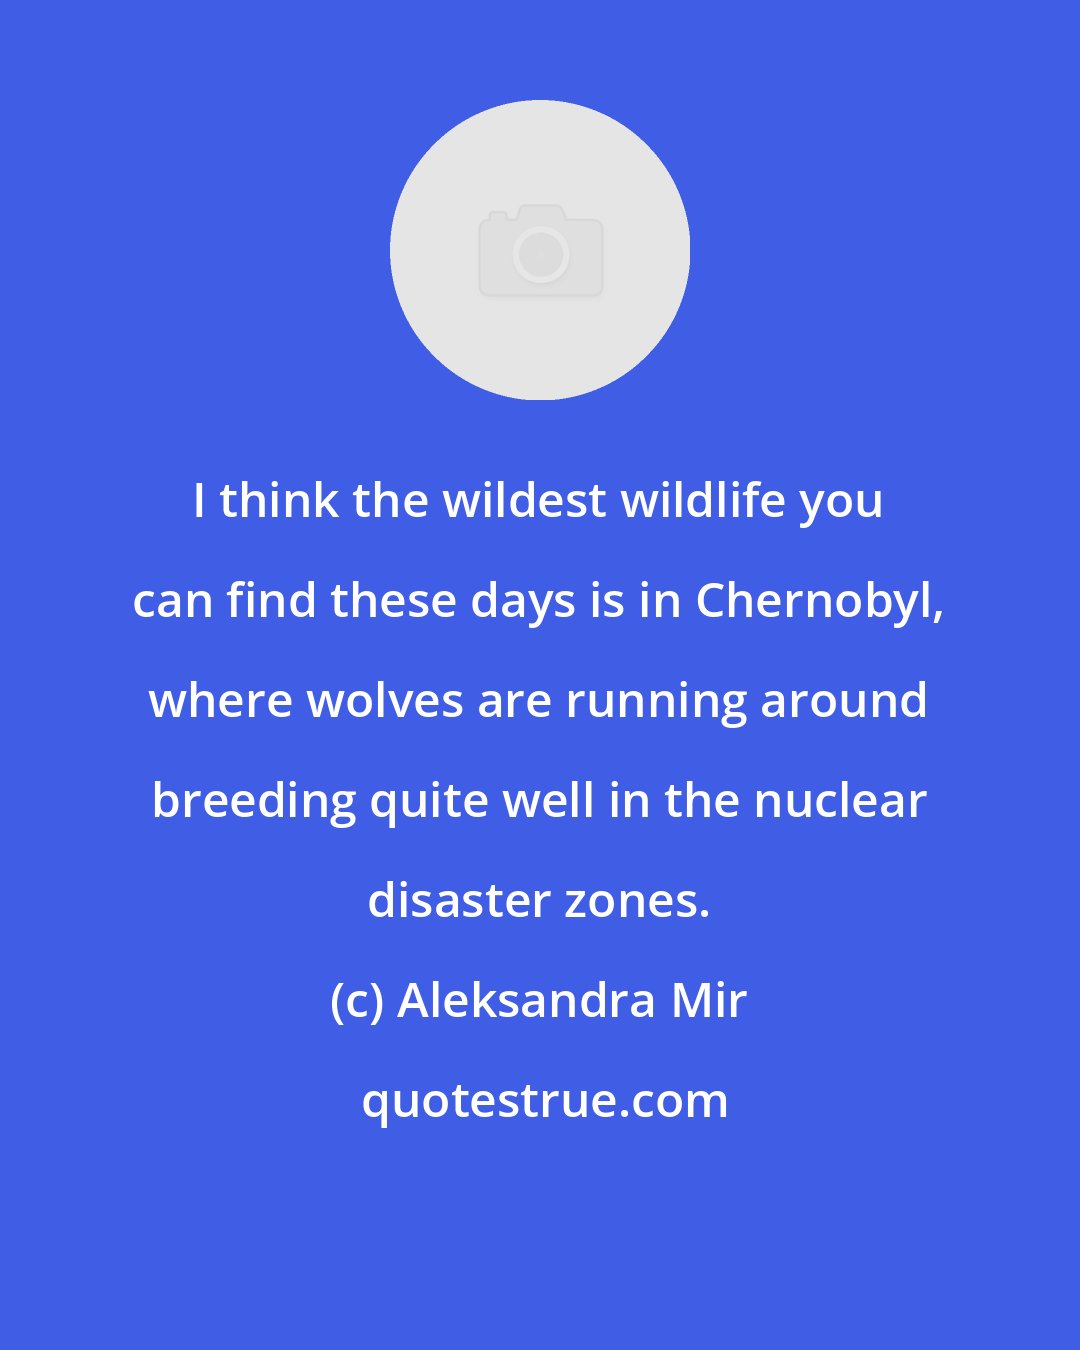 Aleksandra Mir: I think the wildest wildlife you can find these days is in Chernobyl, where wolves are running around breeding quite well in the nuclear disaster zones.